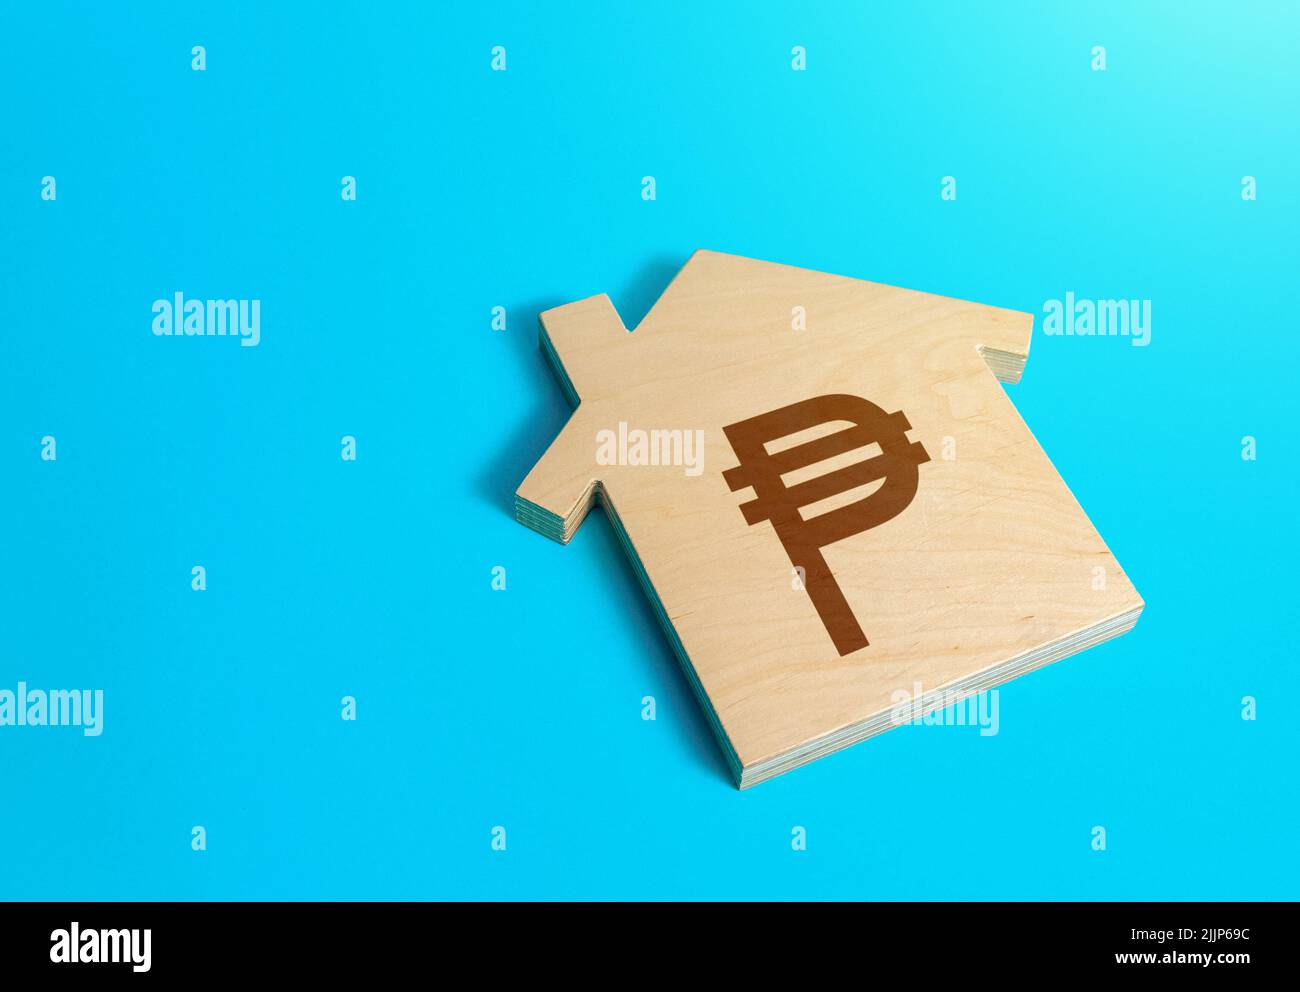 House with a philippine peso symbol. Solving housing problems, deciding buy or rent real estate. Search for options, choice of residential buildings. Stock Photo